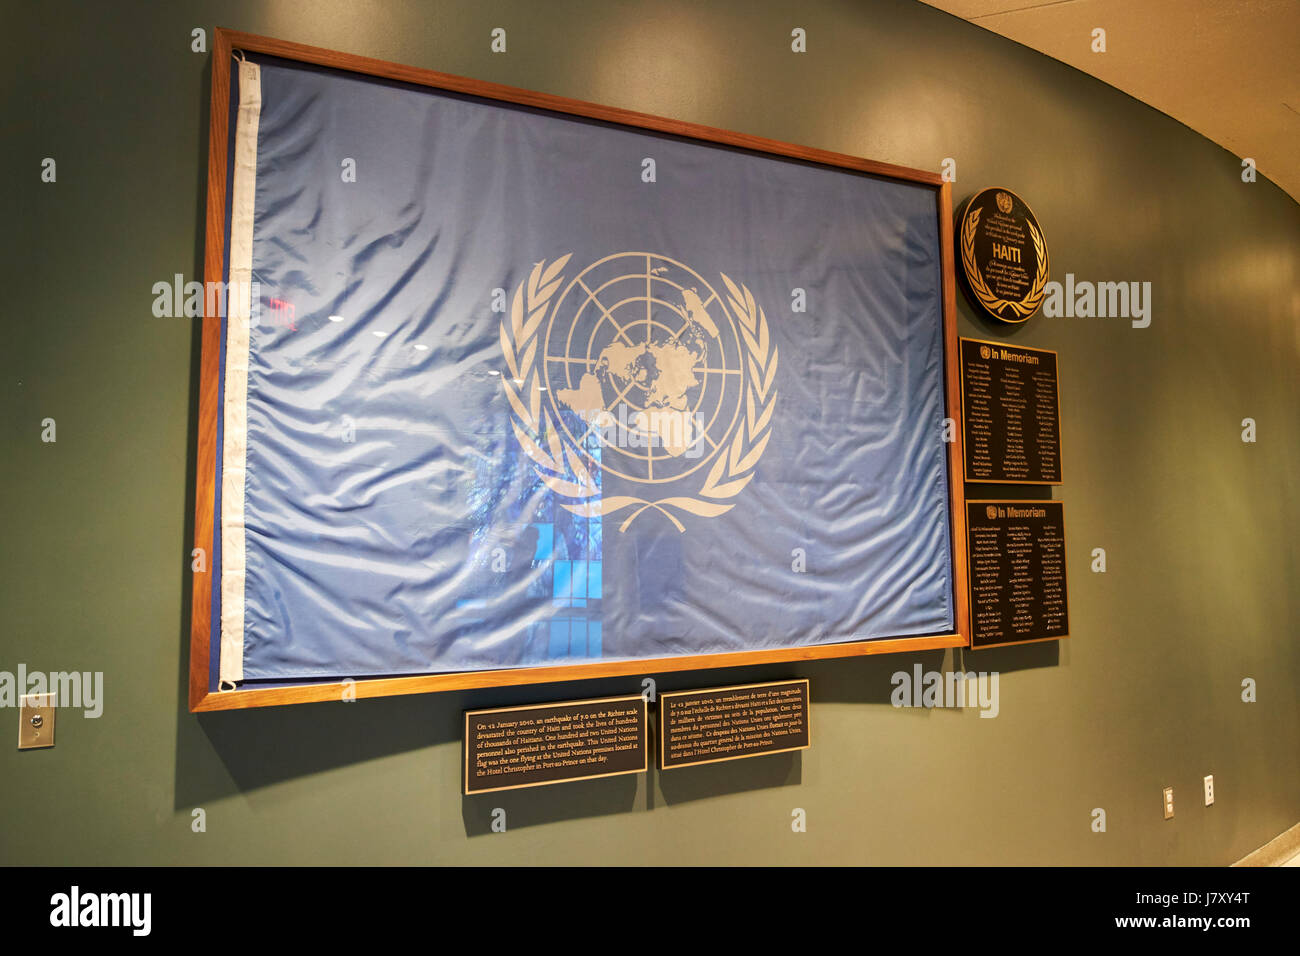 UN framed haiti earthquake flag on display at the United Nations headquarters building New York City USA Stock Photo